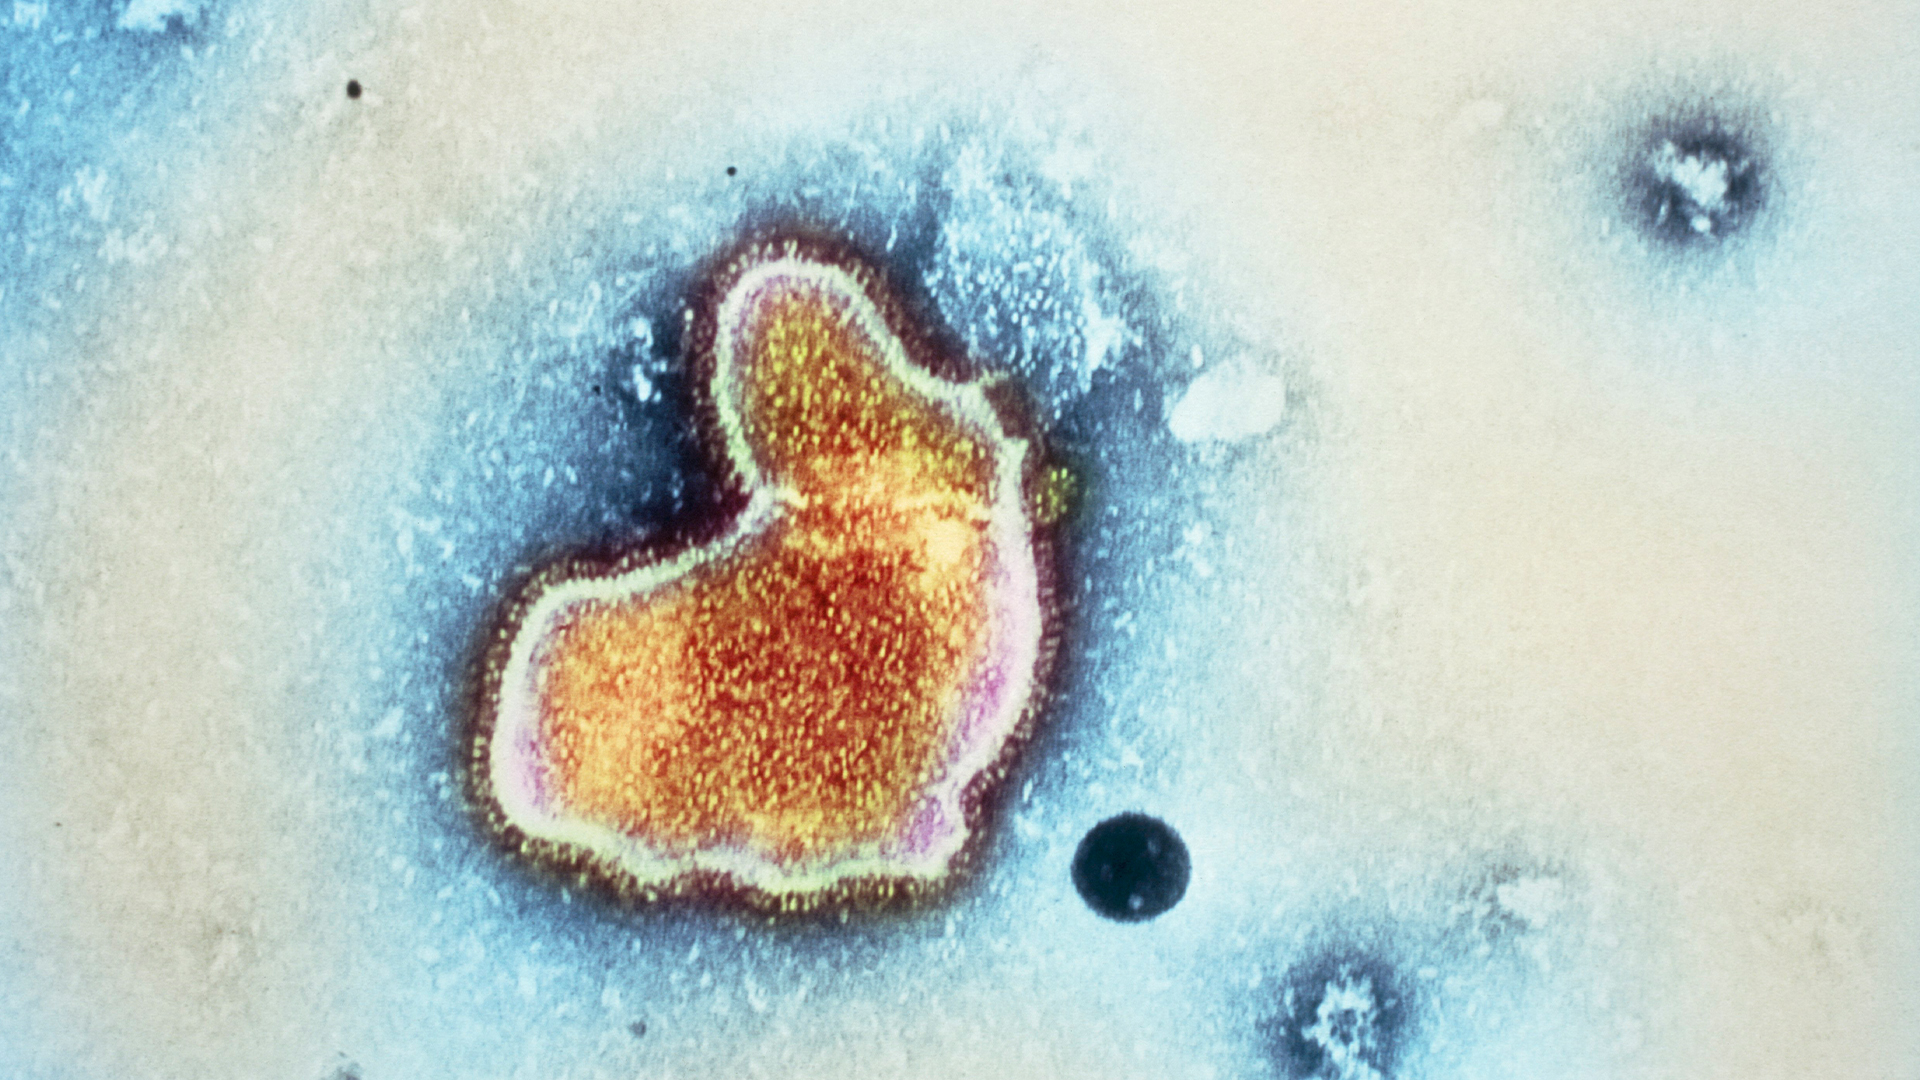 Colored transmission electron micrograph (TEM) of a respiratory syncytial virus (RSV).